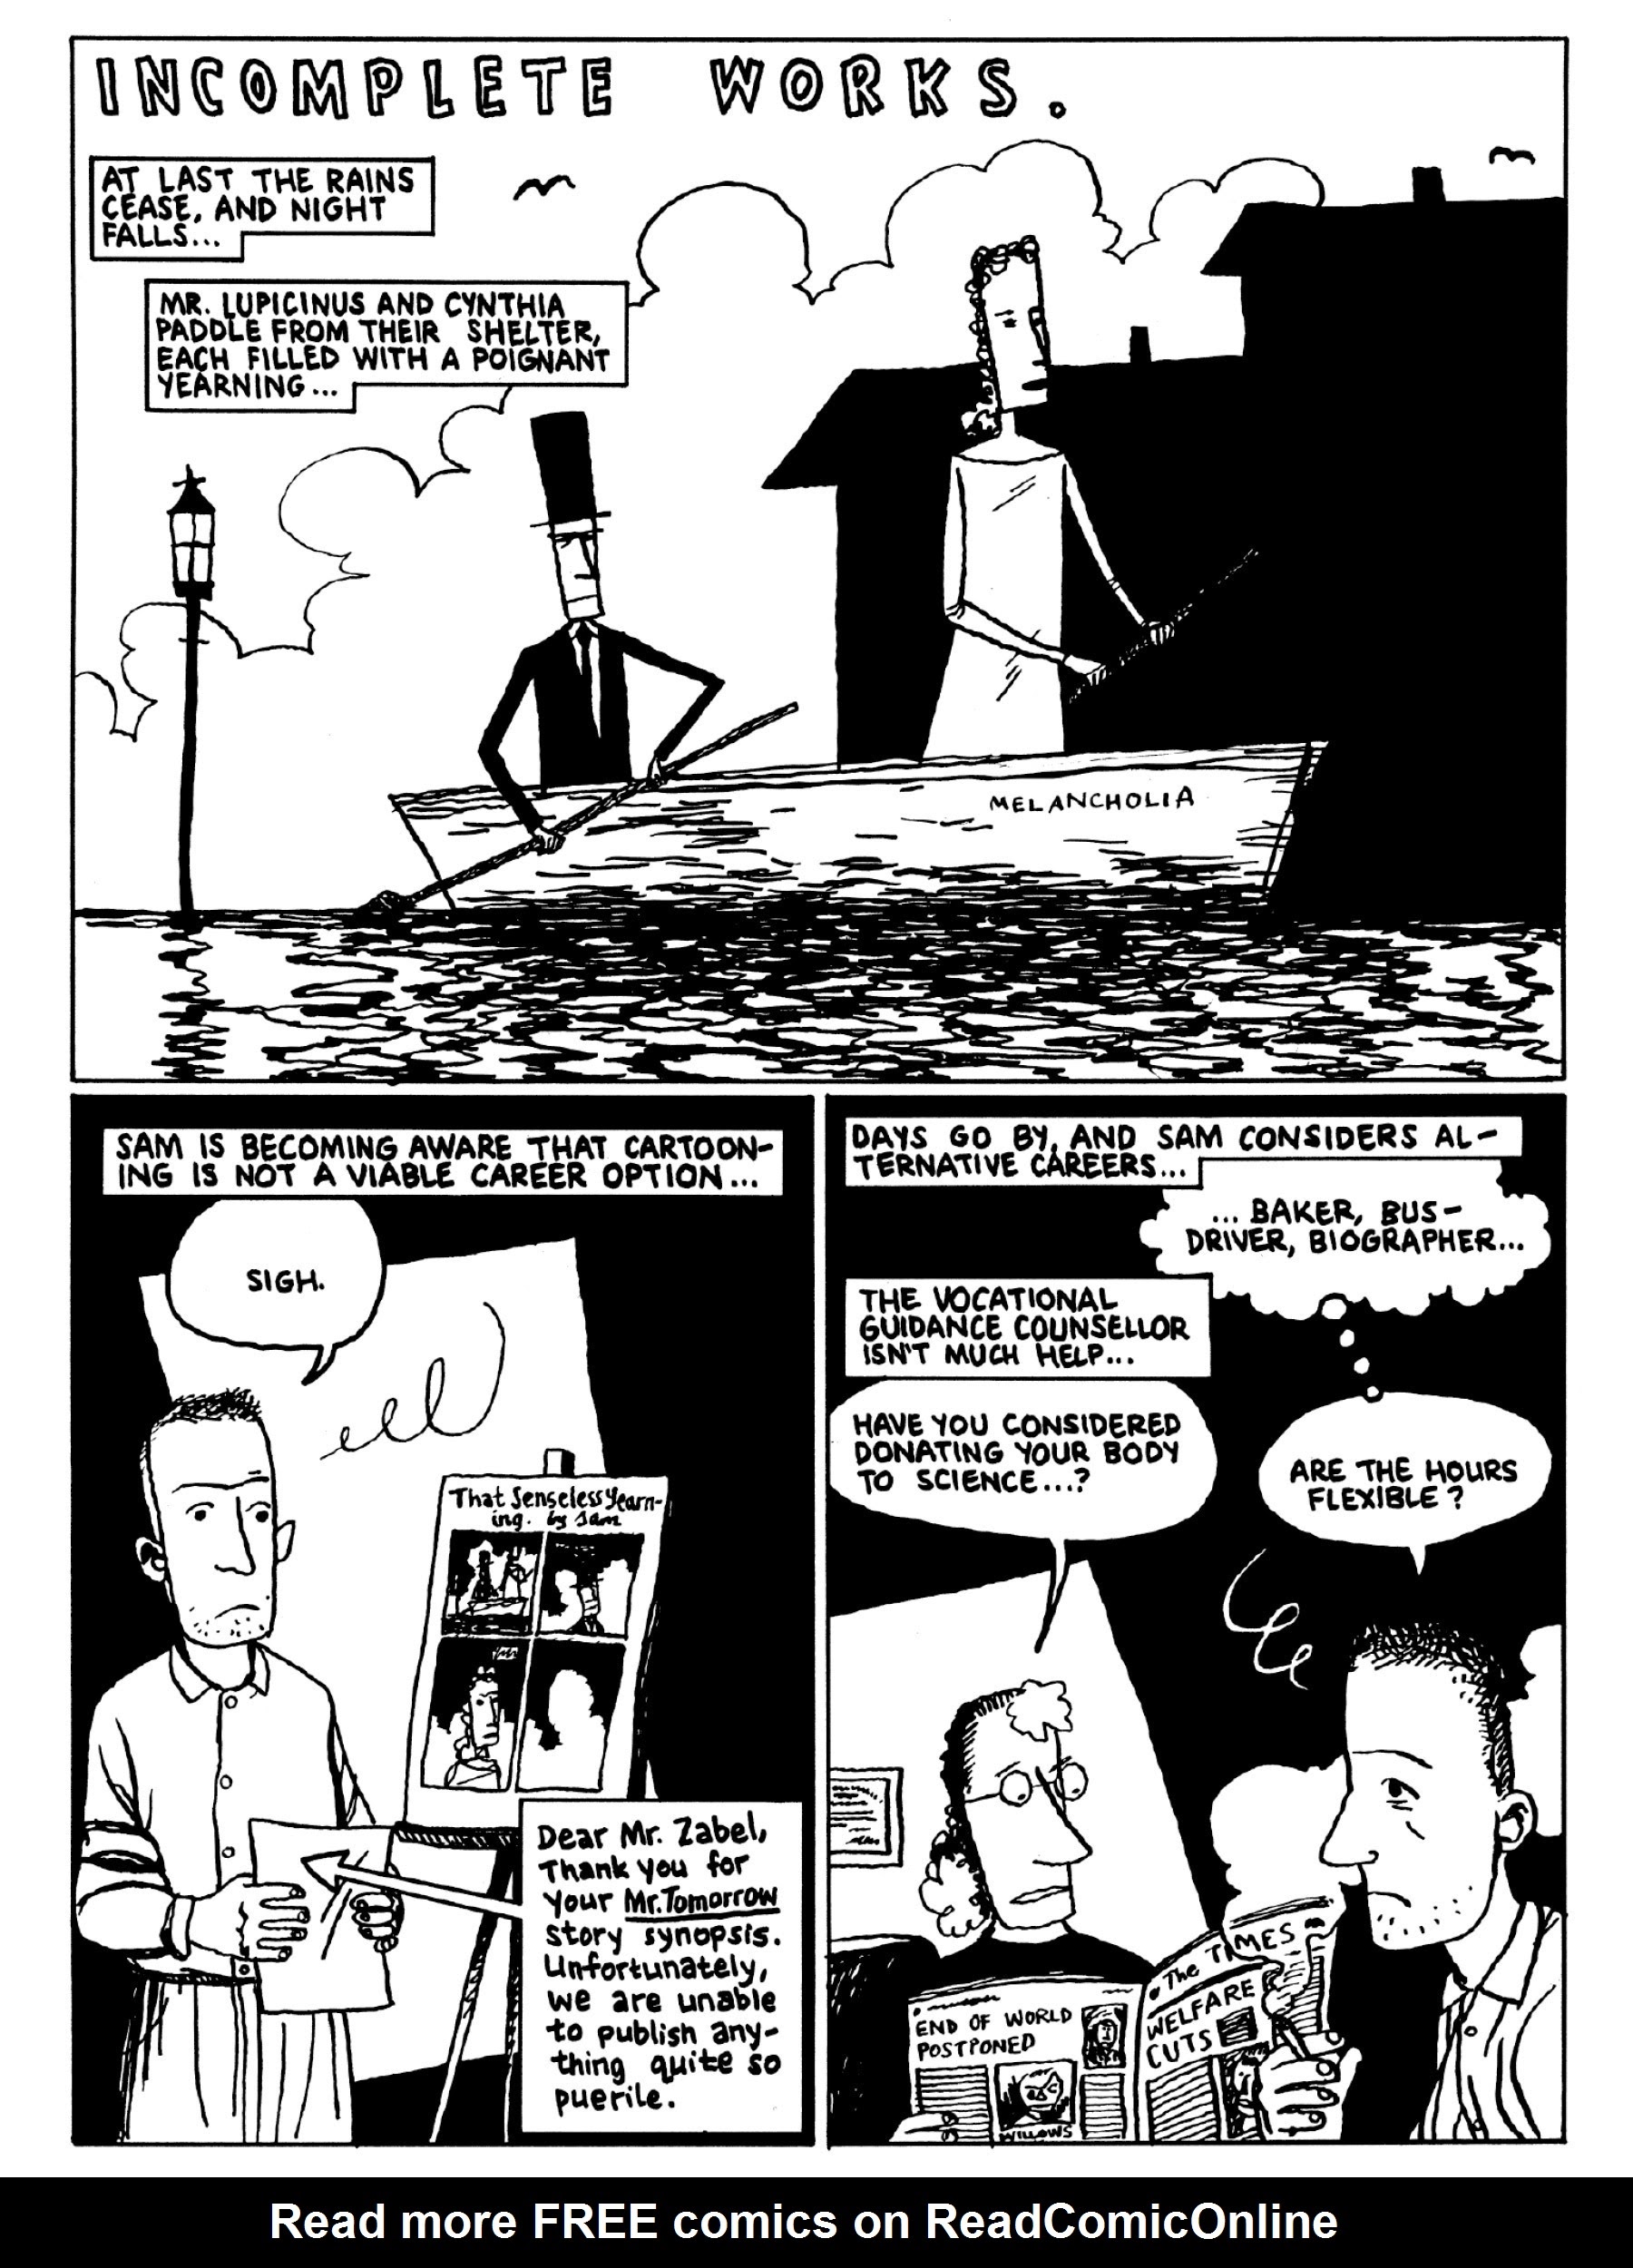 Read online Incomplete Works comic -  Issue # TPB (Part 1) - 18